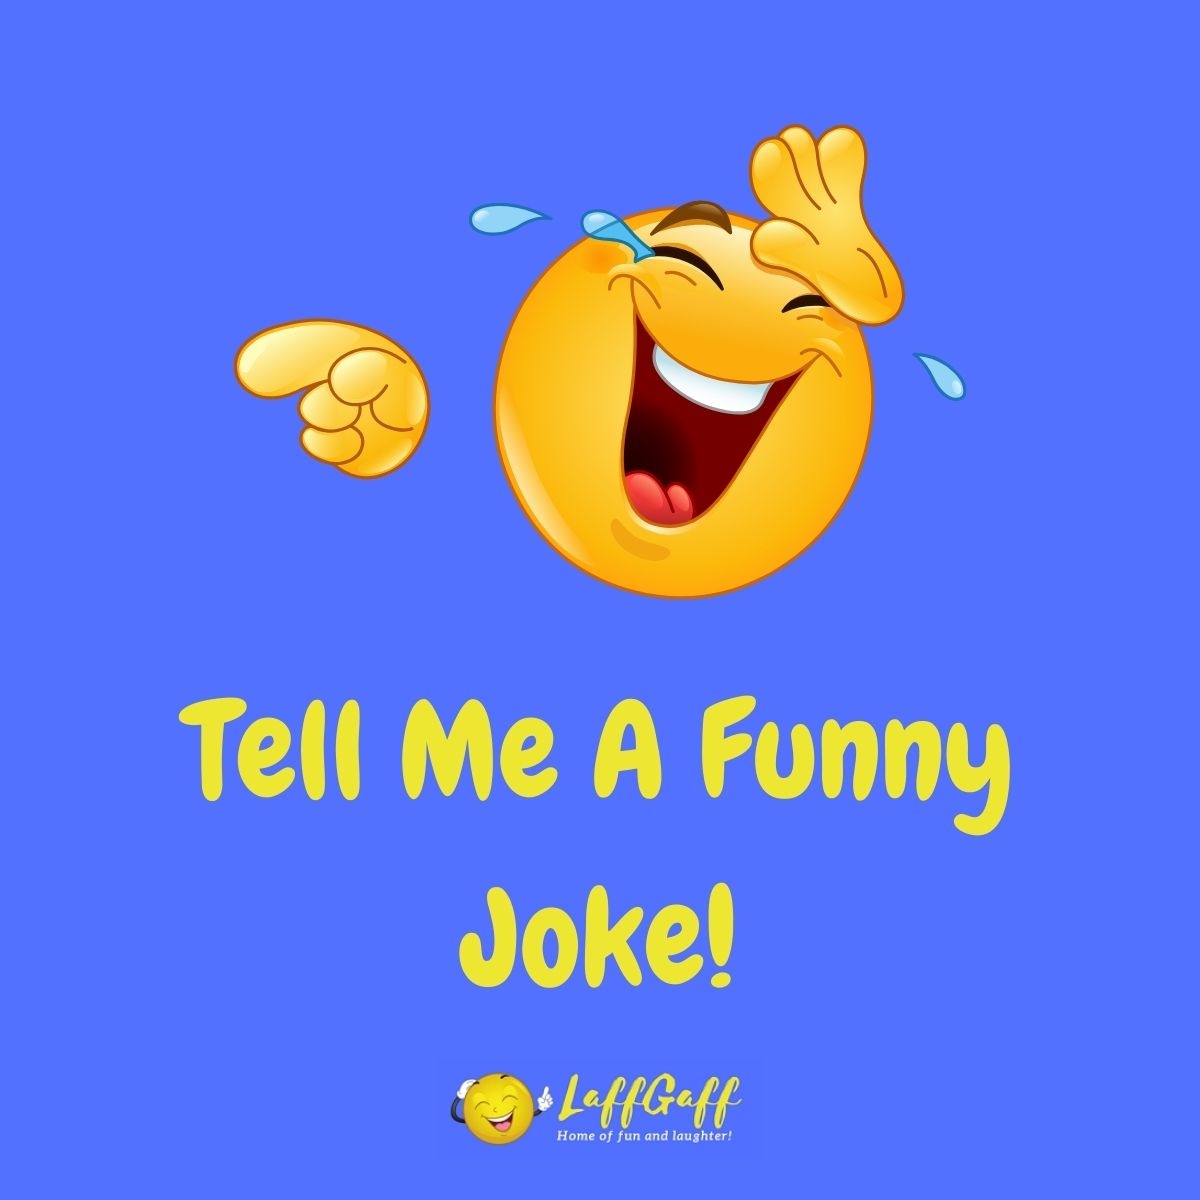 Featured image for tell me a joke generator page.